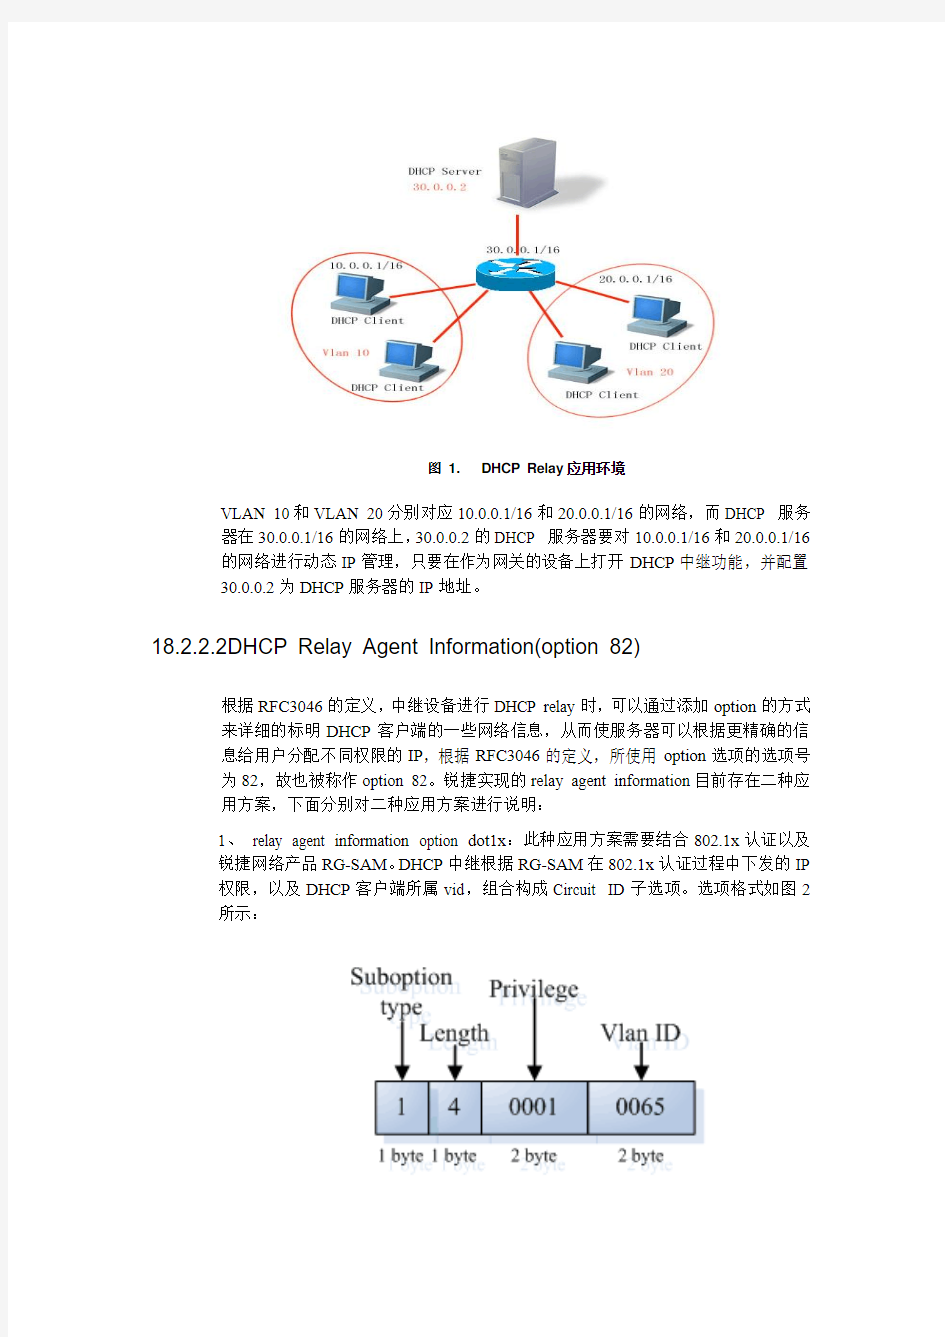 DHCP relay配置管理